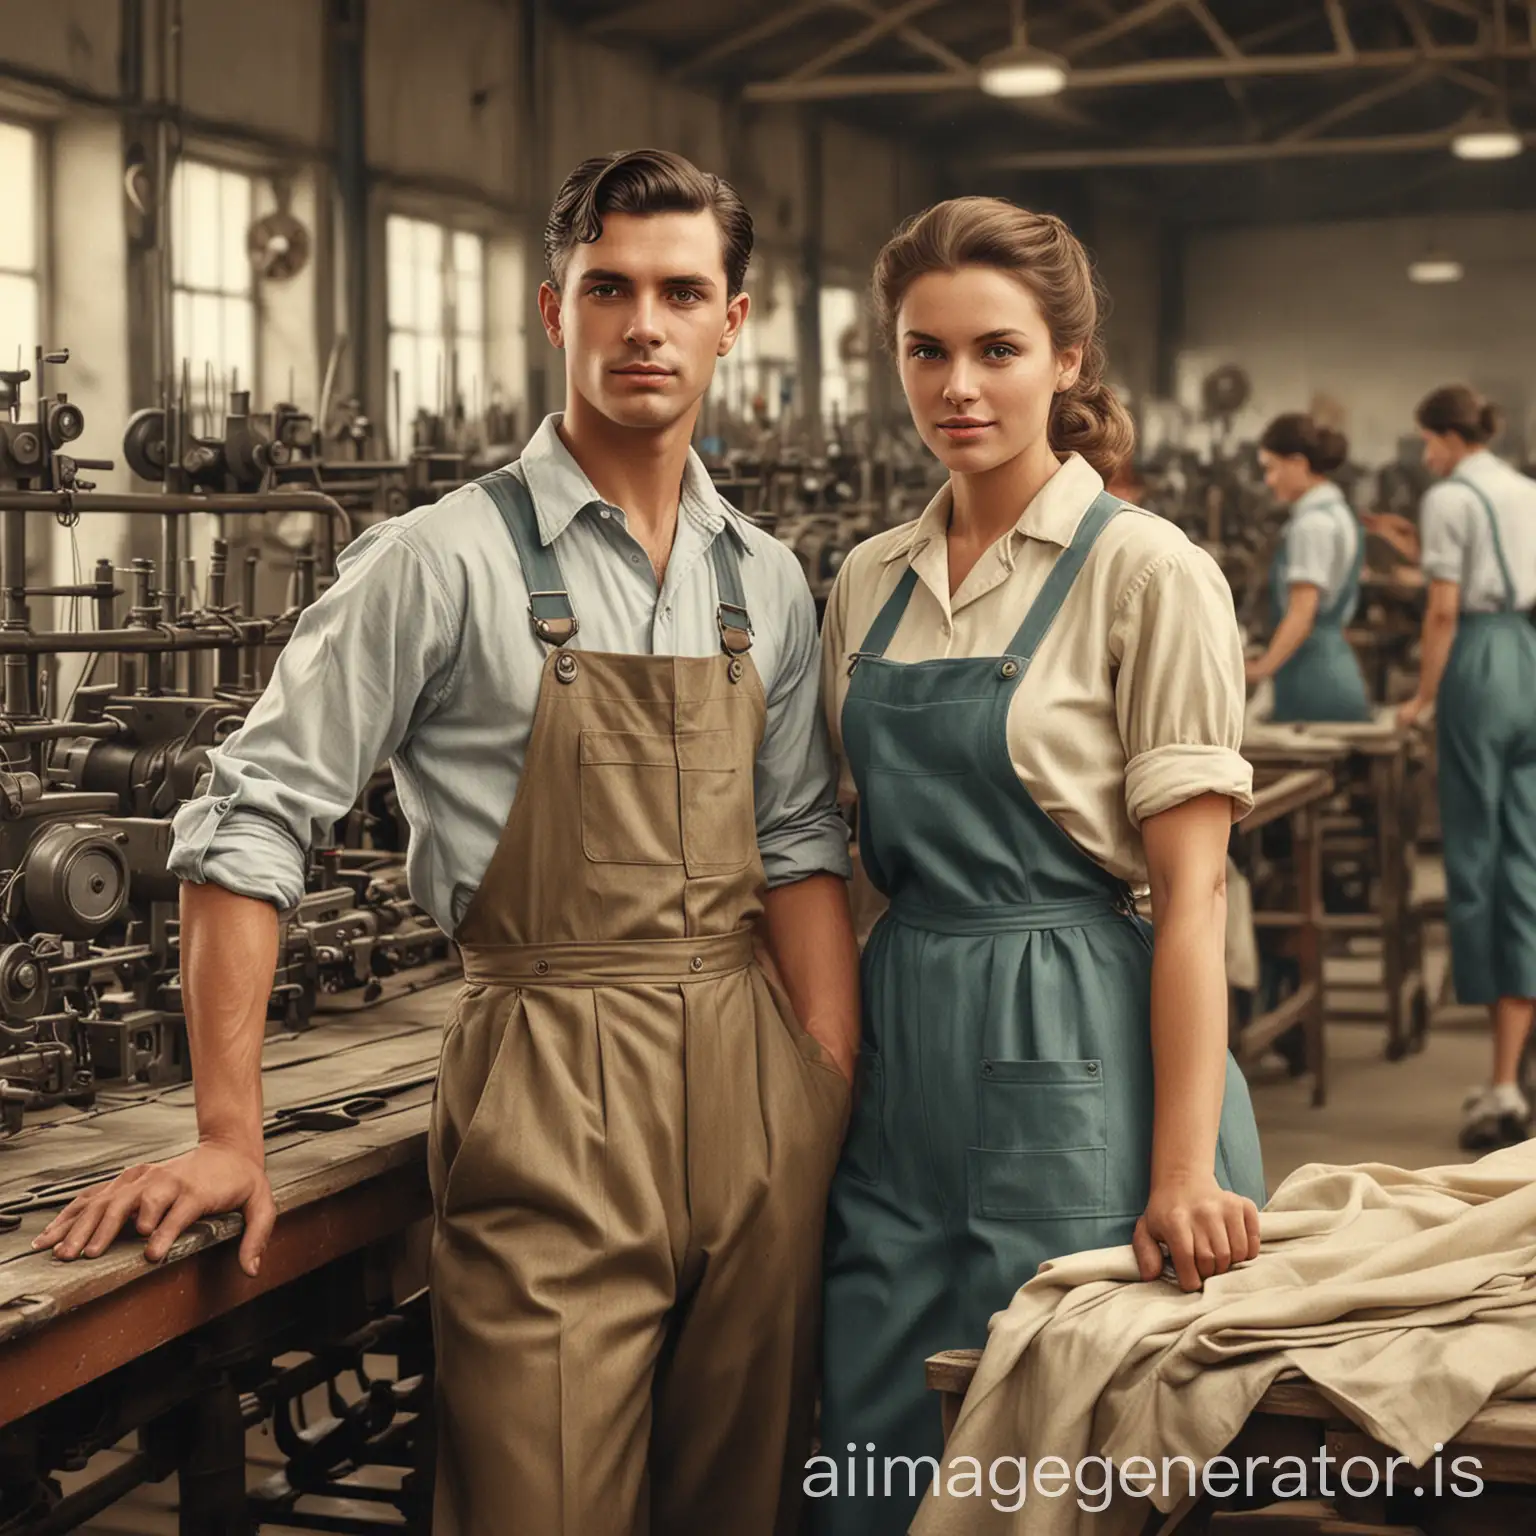 Vintage realistic image of male and female workers posing in a texile factory.